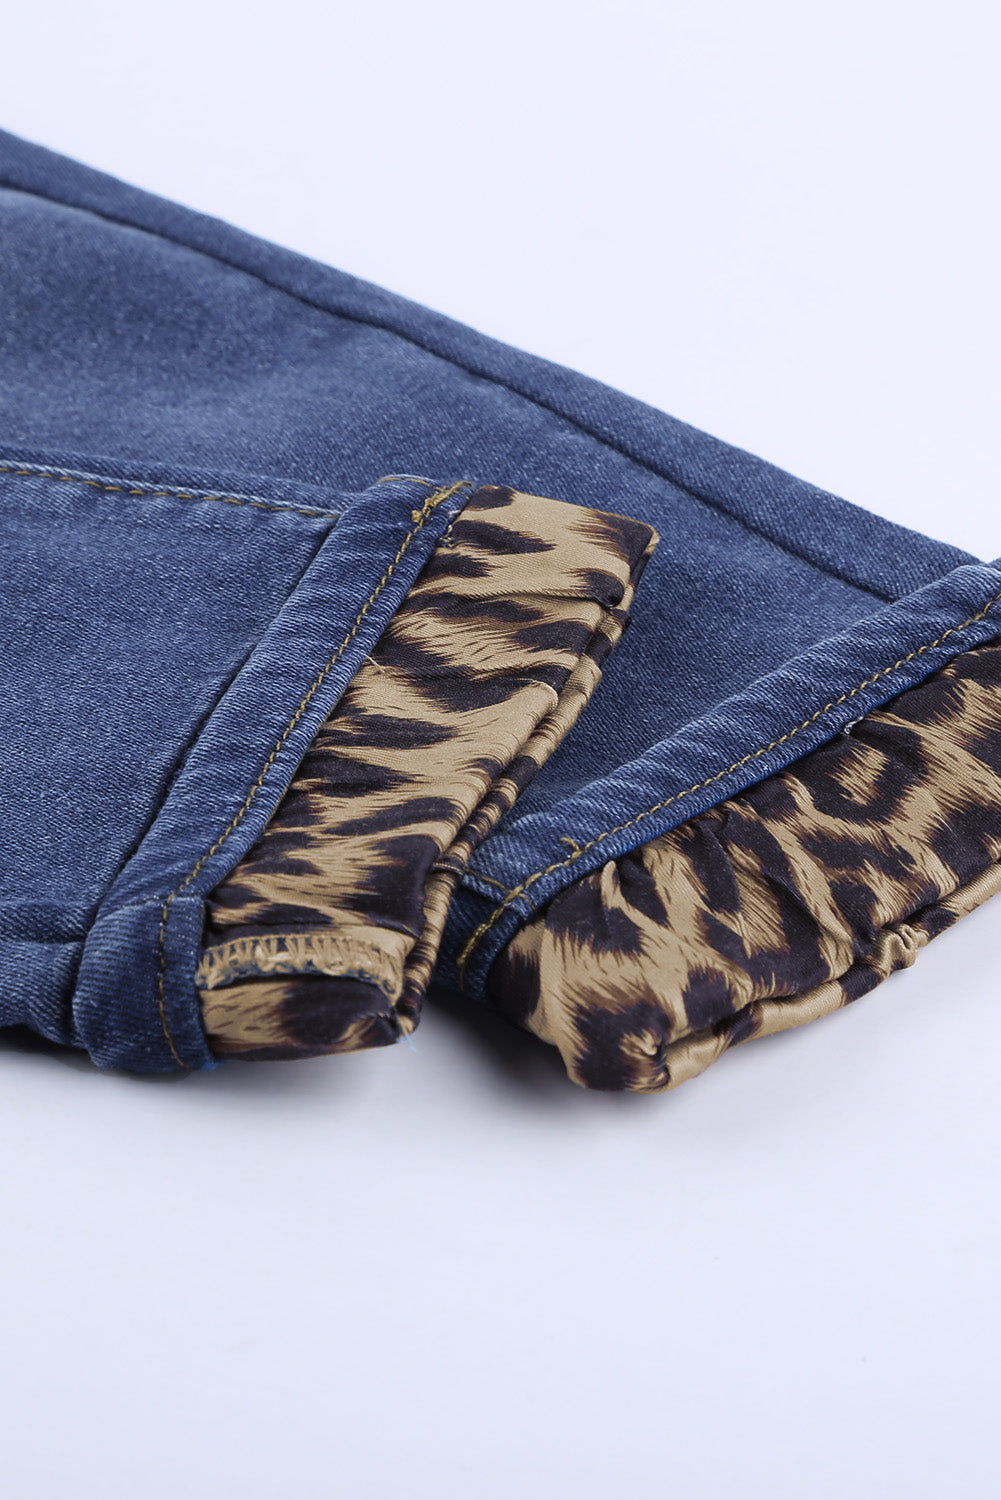 Leopard Patchwork Distressed Jeans - Edy's Treasures